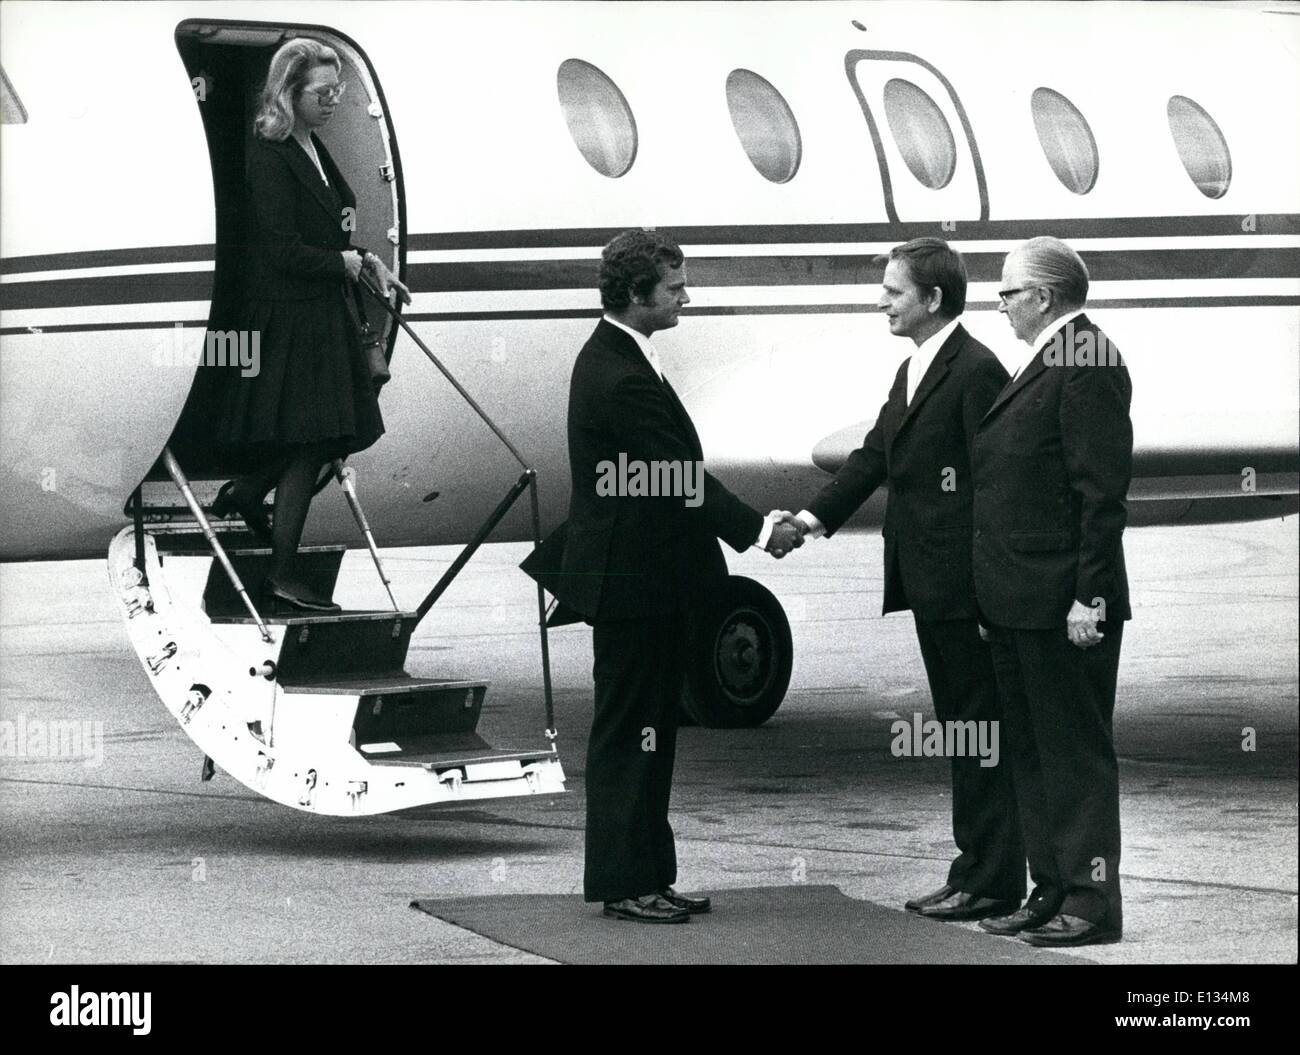 Feb. 26, 2012 - King Gustav Adolf Has Passed Away. Photo shows Princess Christina And The Successor To The Throne Carl Gustav Being Met At The Airport By Prime Minister Olof Palme And The Chancellor Of The Exchequer Gunnar Strang. Palme And Strang Met Them At Arlanda Airport To Express Their Participation In Their Sorrow. Stock Photo